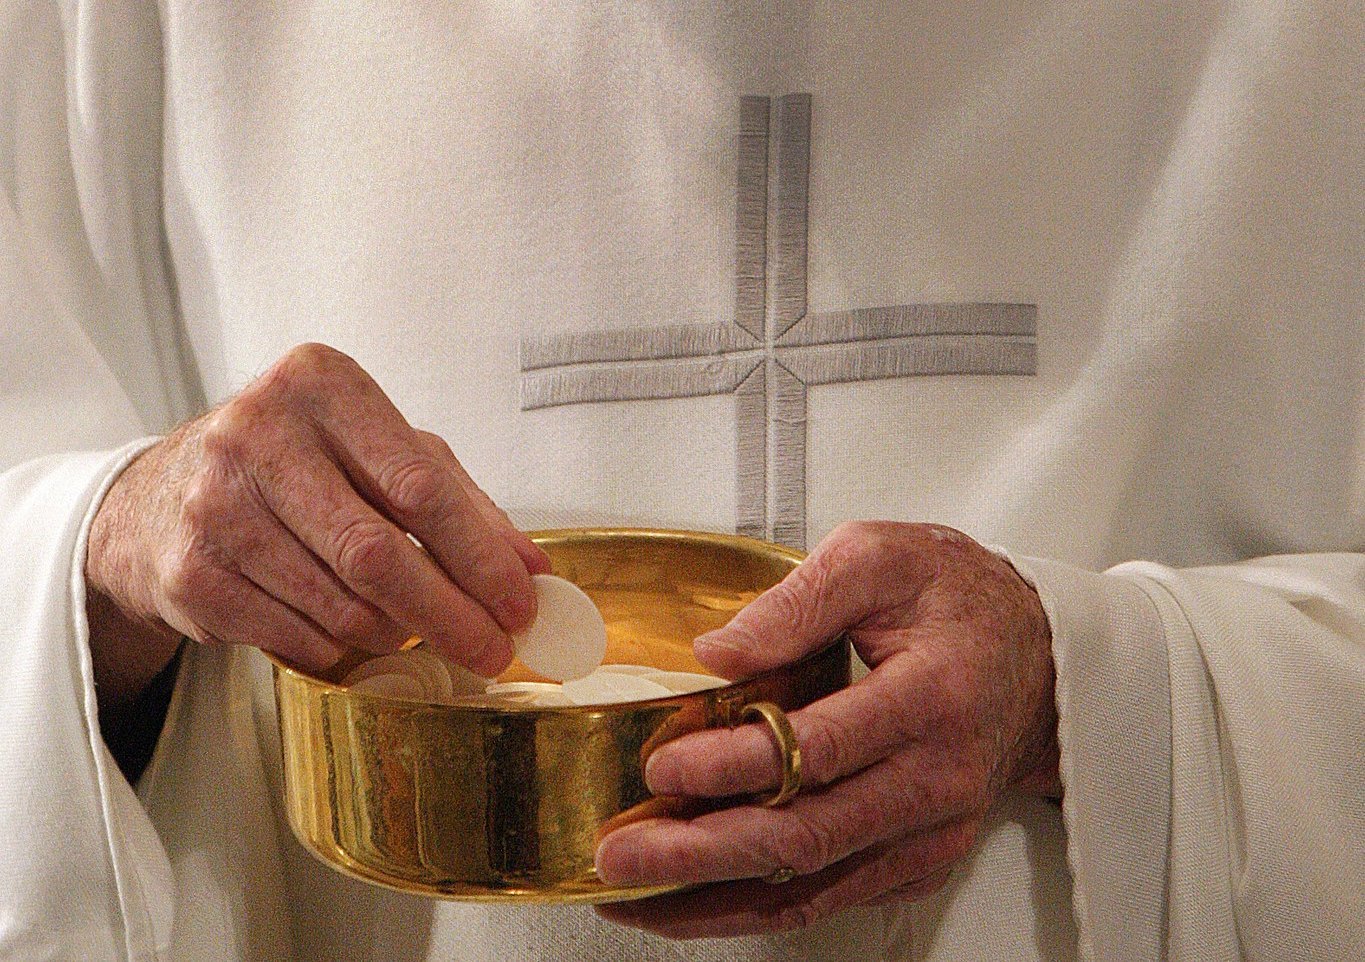 This is an illustration of a priest distributing Communion. The Diocese of Stockton, Calif., has issued a warning about impostors posing as Catholic clergy and charging Spanish-speaking faithful "exorbitant fees" for celebrating the sacraments. (OSV News photo/Bob Roller)